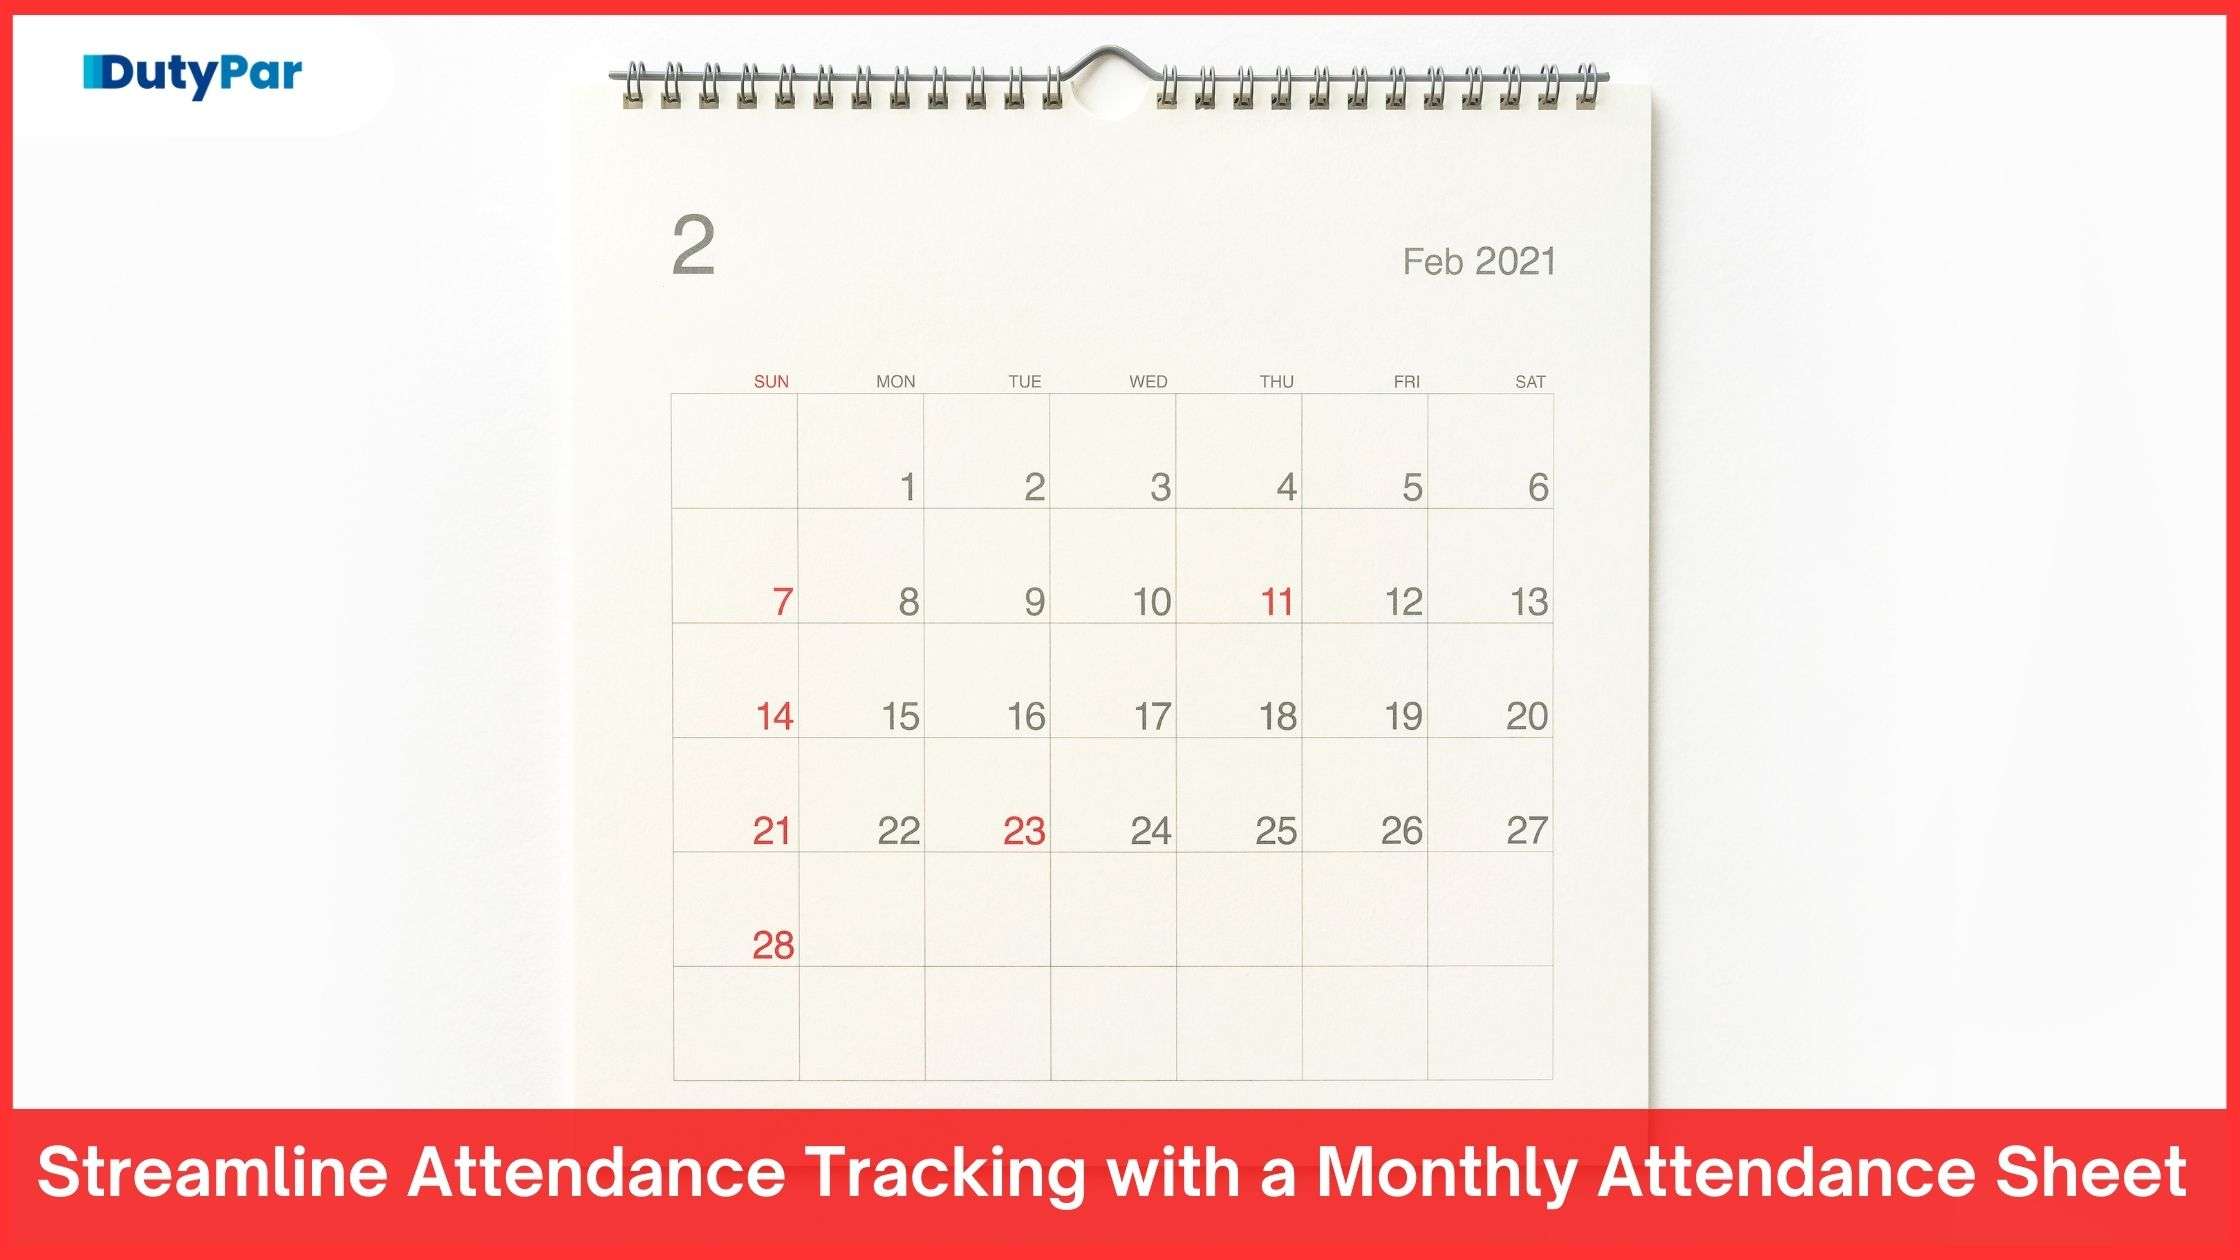 Streamline Attendance Tracking with a Monthly Attendance Sheet